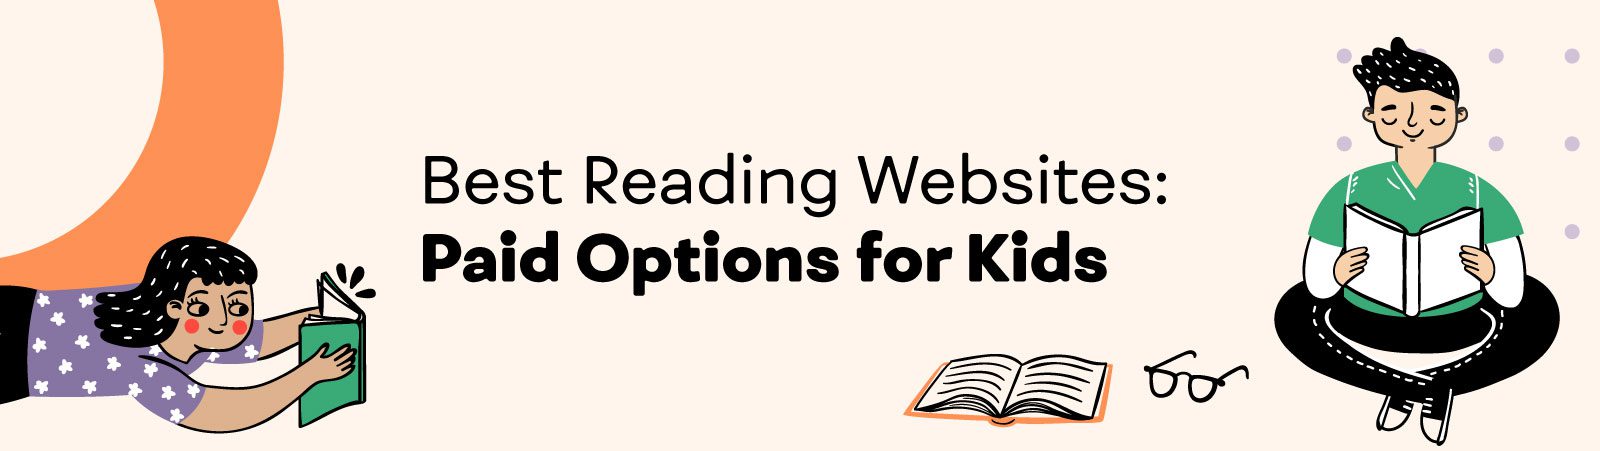 Best reading websites: paid options for kids.